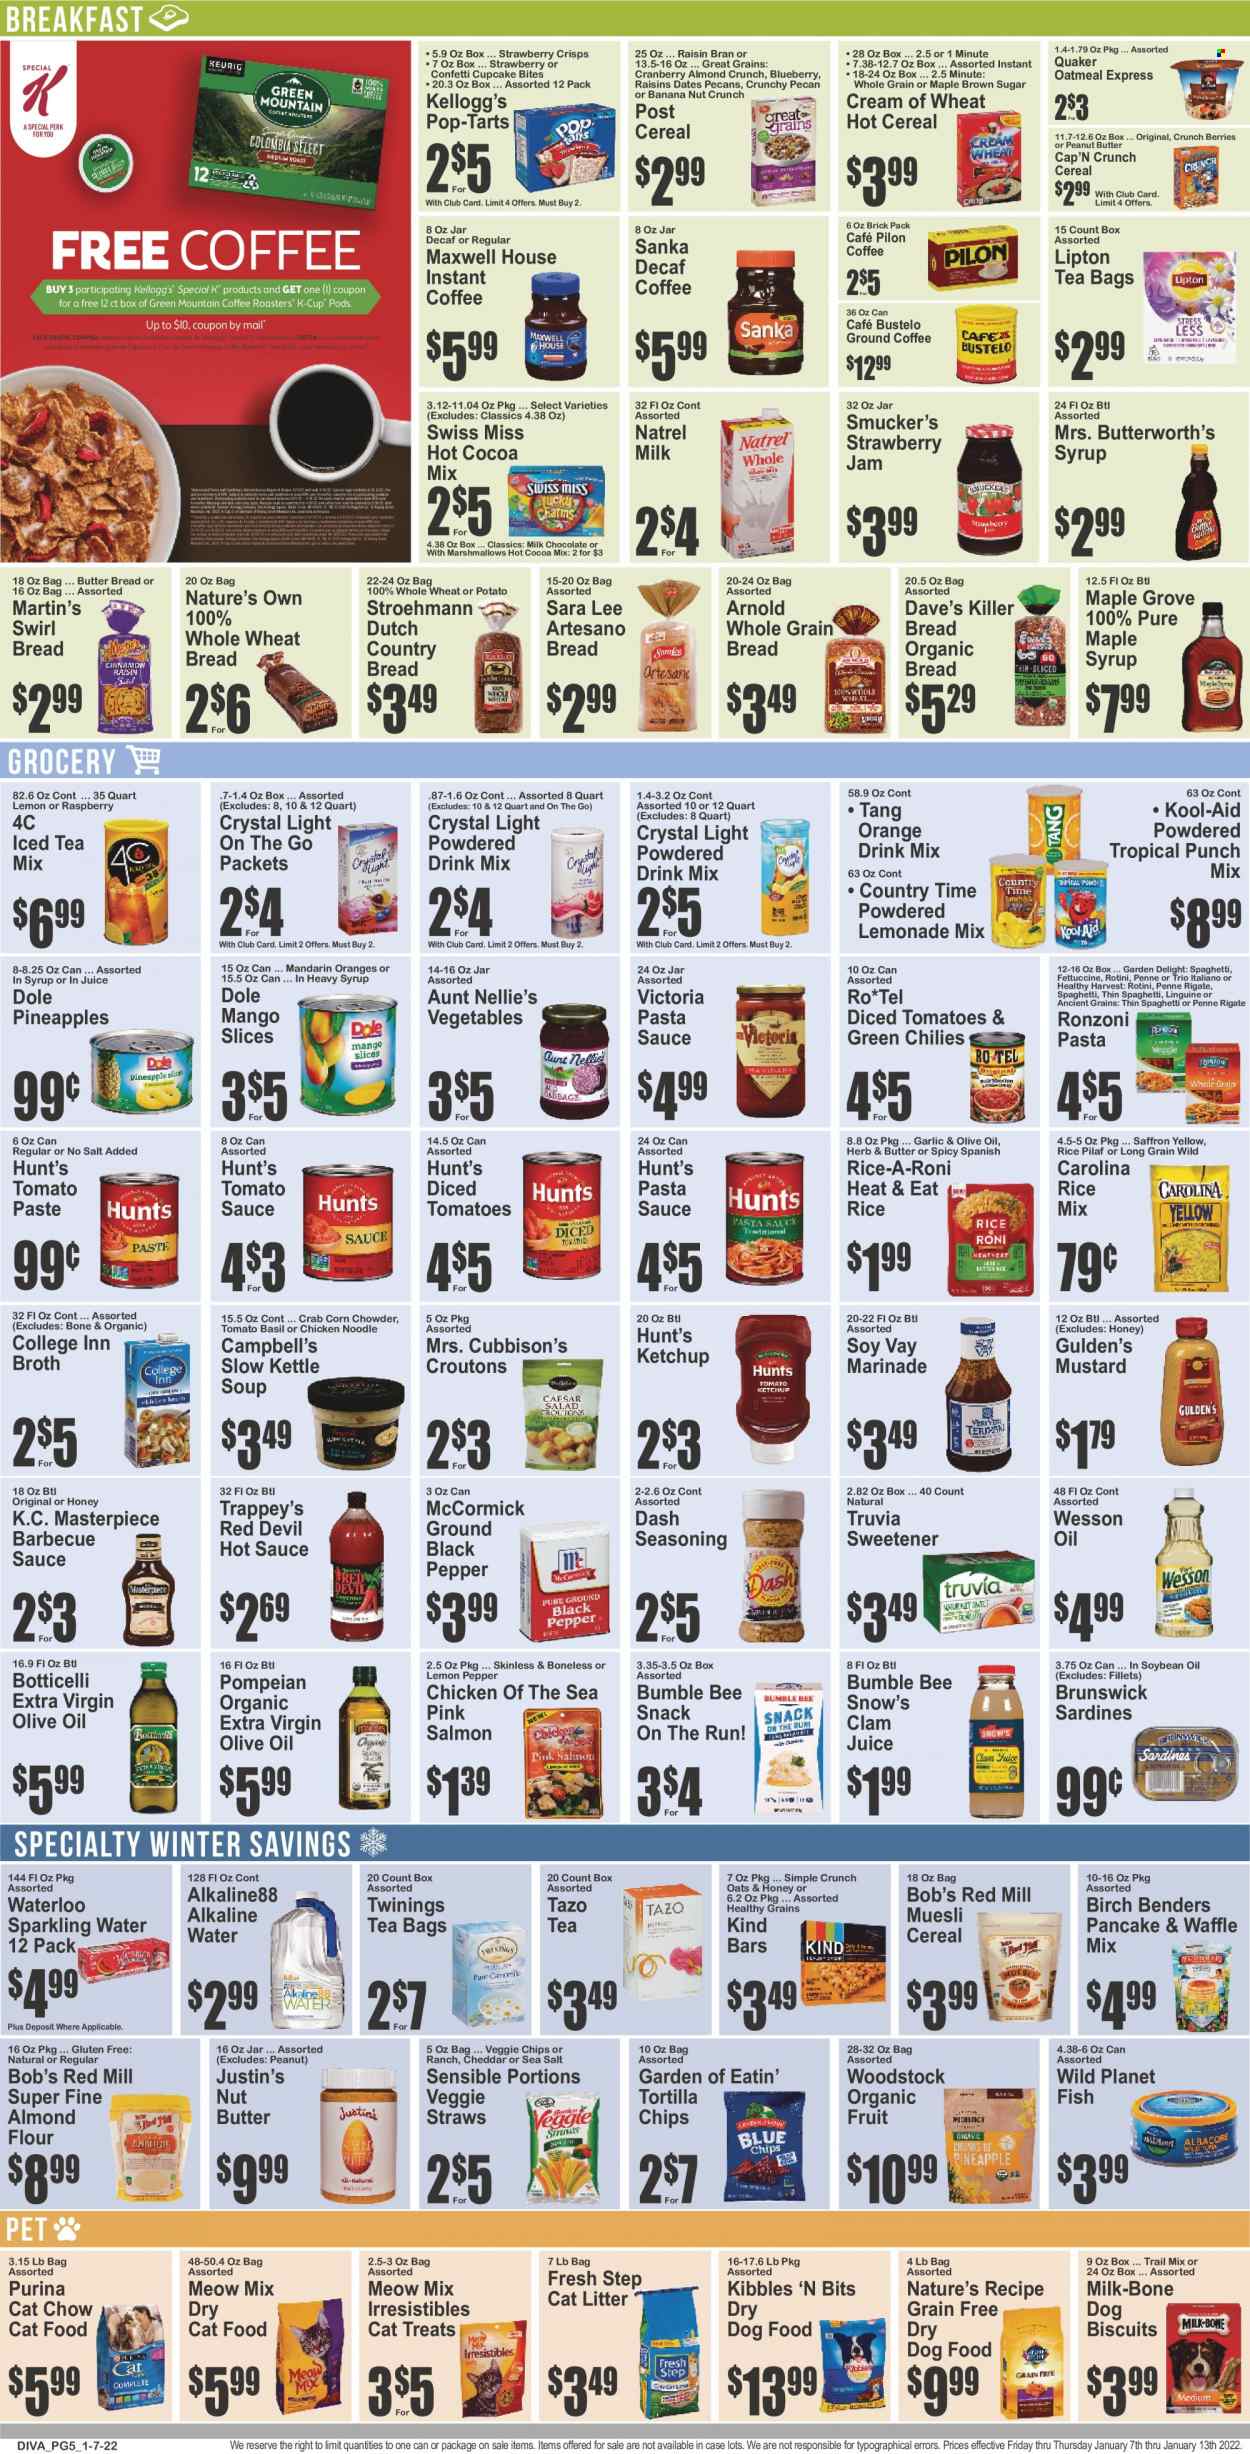 thumbnail - Key Food Flyer - 01/07/2022 - 01/13/2022 - Sales products - bread, tortillas, wheat bread, Sara Lee, cupcake, pancake mix, corn, Dole, mandarines, pineapple, clams, sardines, crab, Campbell's, spaghetti, pasta sauce, soup, Bumble Bee, sauce, Quaker, ready meal, rice sides, cheese, snack bar, Swiss Miss, milk chocolate, Kellogg's, Pop-Tarts, bars, veggie straws, crisps, cane sugar, croutons, oatmeal, broth, almond flour, sweetener, strawberry jam, tomato paste, tomato sauce, tomatoes & green chilies, Chicken of the Sea, diced tomatoes, canned fish, cereals, Cream of Wheat, corn flakes, nut bar, muesli, Cap'n Crunch, Raisin Bran, penne, black pepper, BBQ sauce, Dashi, mustard, hot sauce, ketchup, marinade, extra virgin olive oil, soya oil, olive oil, maple syrup, fruit jam, nut butter, jam, pecans, trail mix, lemonade, juice, Lipton, fruit drink, Country Time, fruit punch, sparkling water, alkaline water, powder drink, hot cocoa, Maxwell House, tea bags, Twinings, coffee, instant coffee, ground coffee, coffee capsules, K-Cups, Keurig, Green Mountain, cat litter, animal food, animal treats, cat food, dog food, Purina, dog biscuits, dry dog food, dry cat food, Meow Mix, Fresh Step, Nature's Own. Page 5.